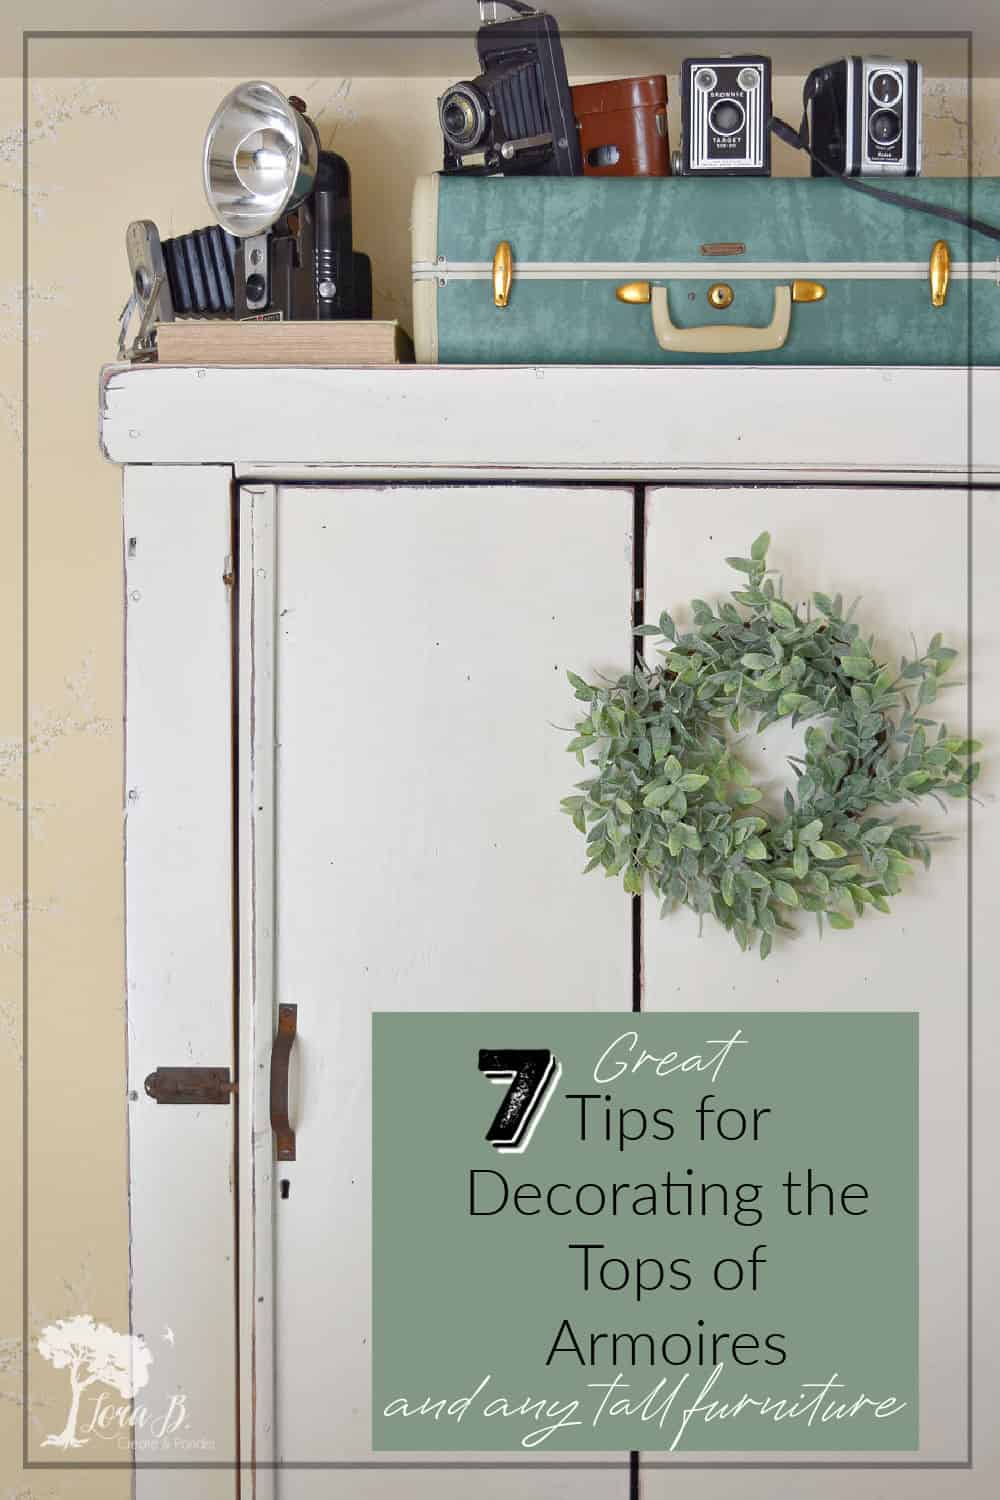 7 Ideas for Decorating the Tops of Armoires, Bookcases (and any tall furniture)